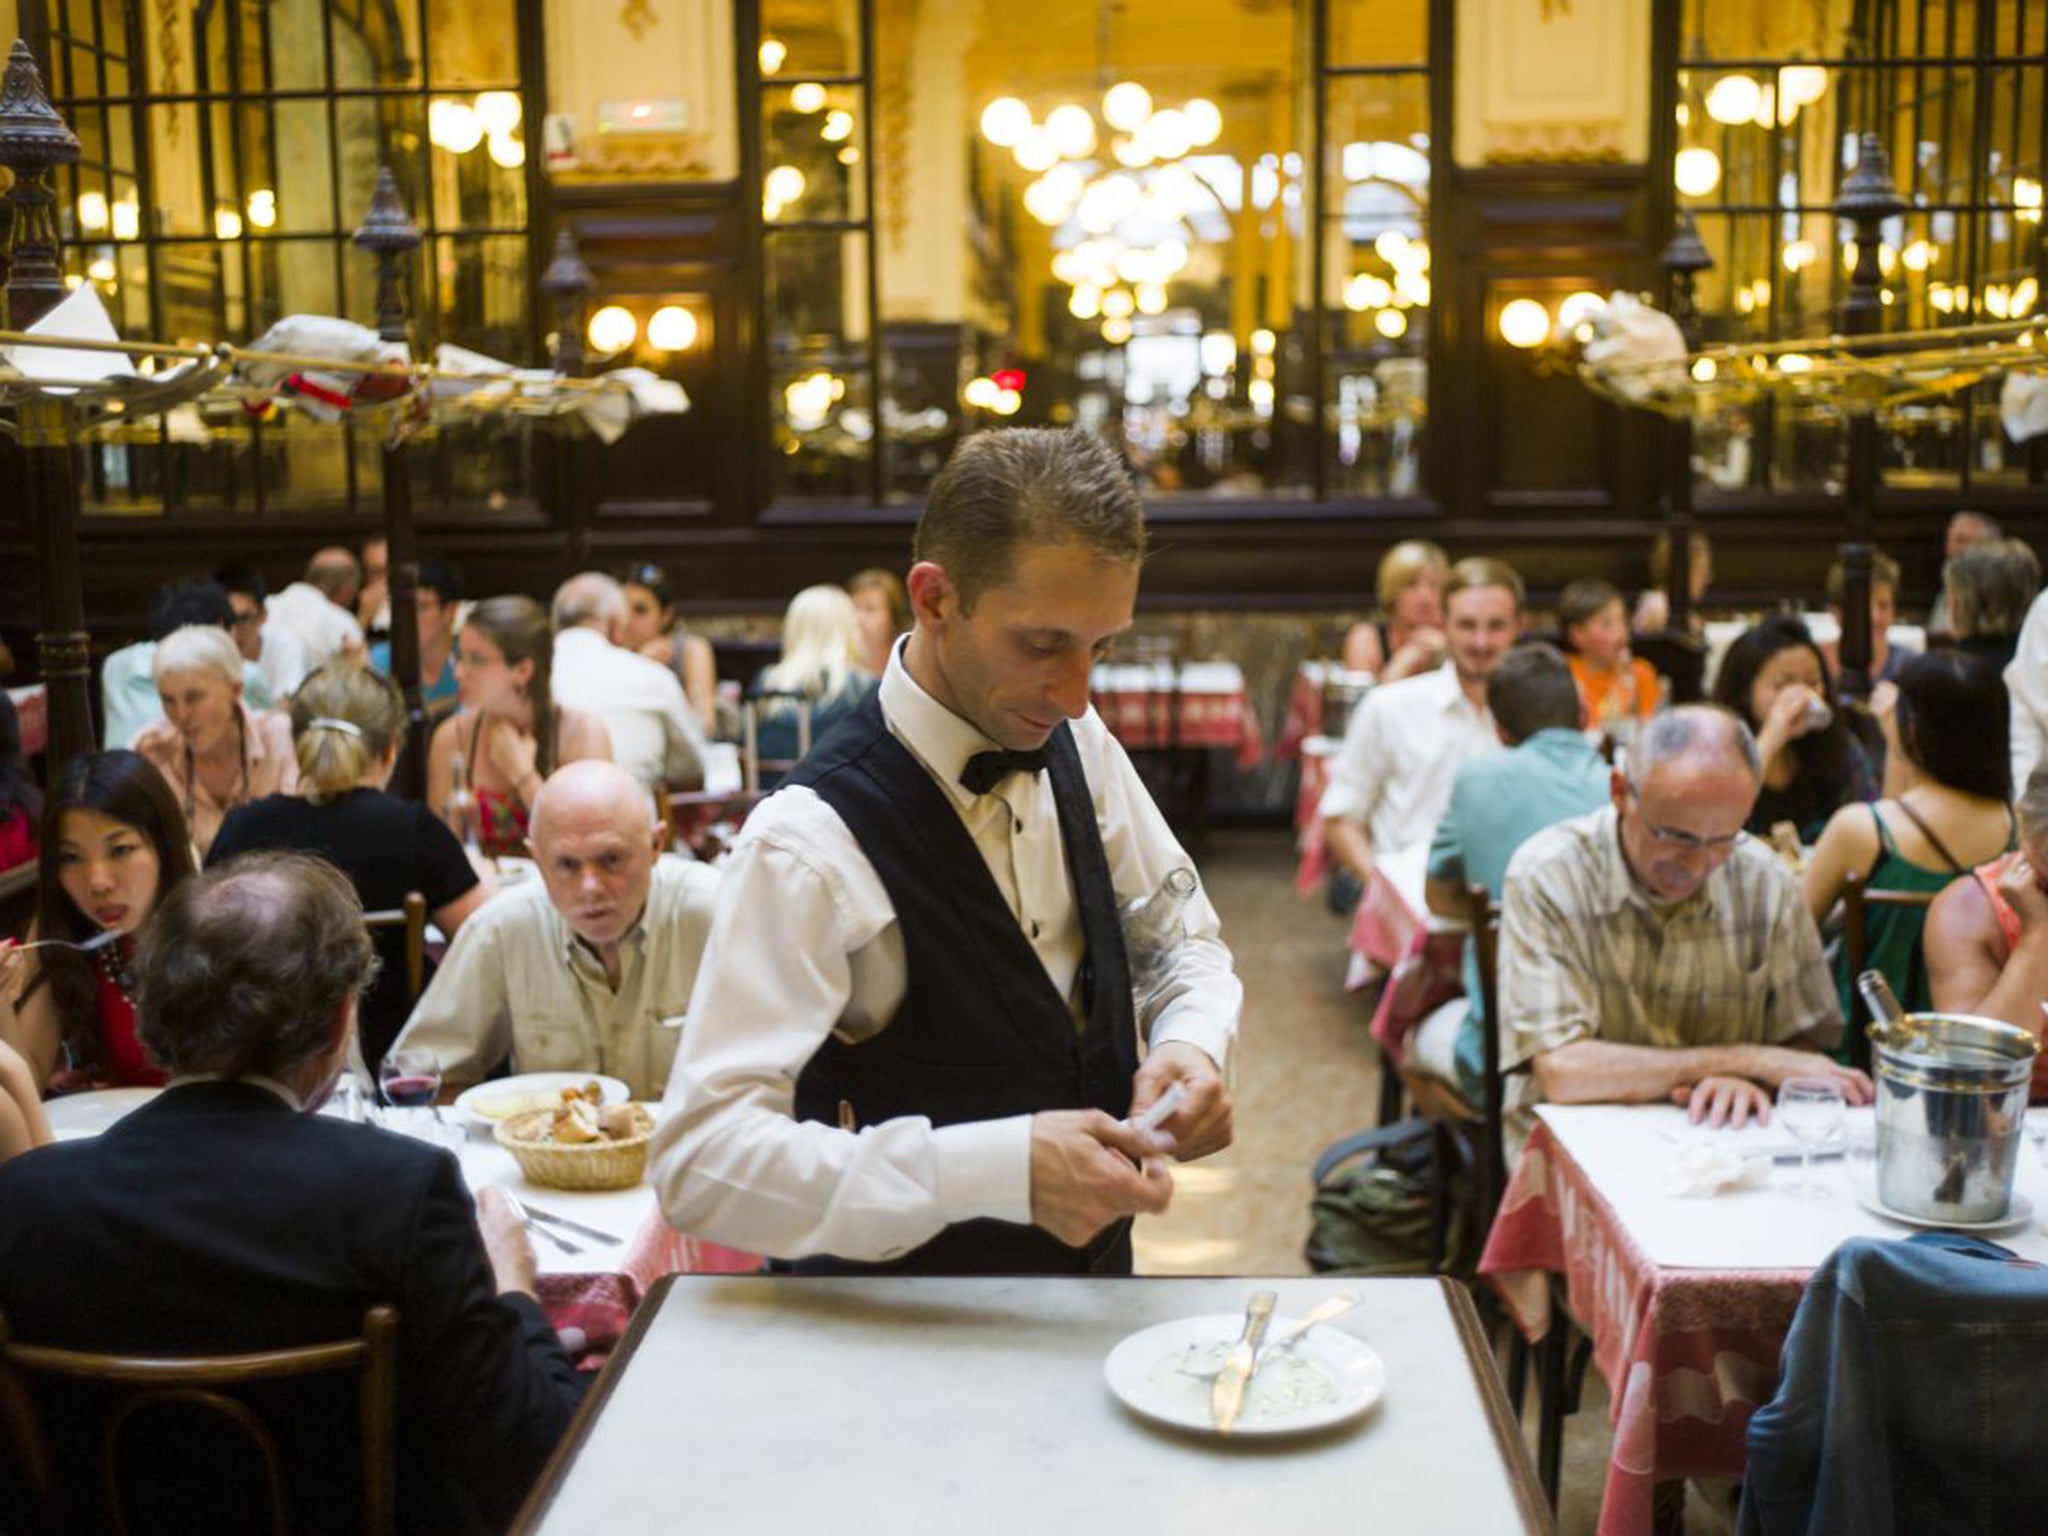 French waiters have had enough of rude customers